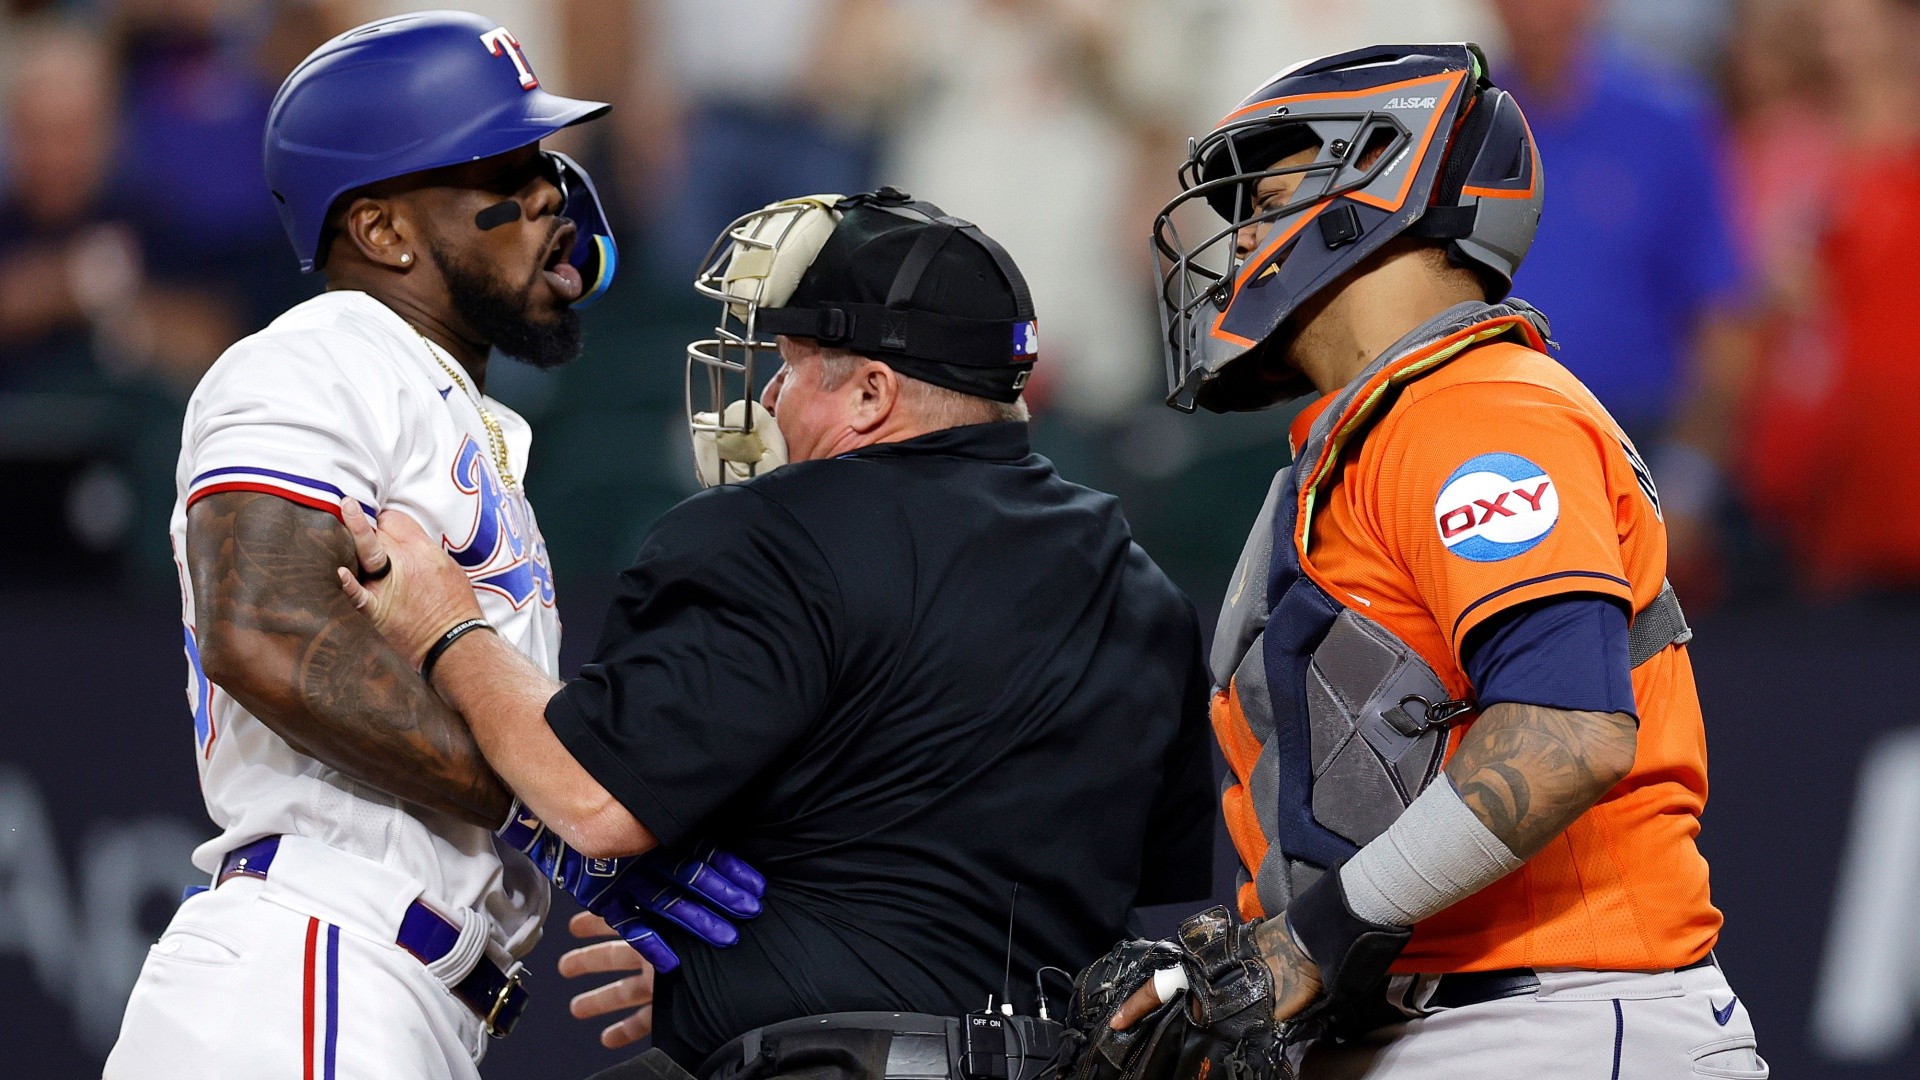 Why benches cleared in Houston Astros-Texas Rangers ALCS Game 5